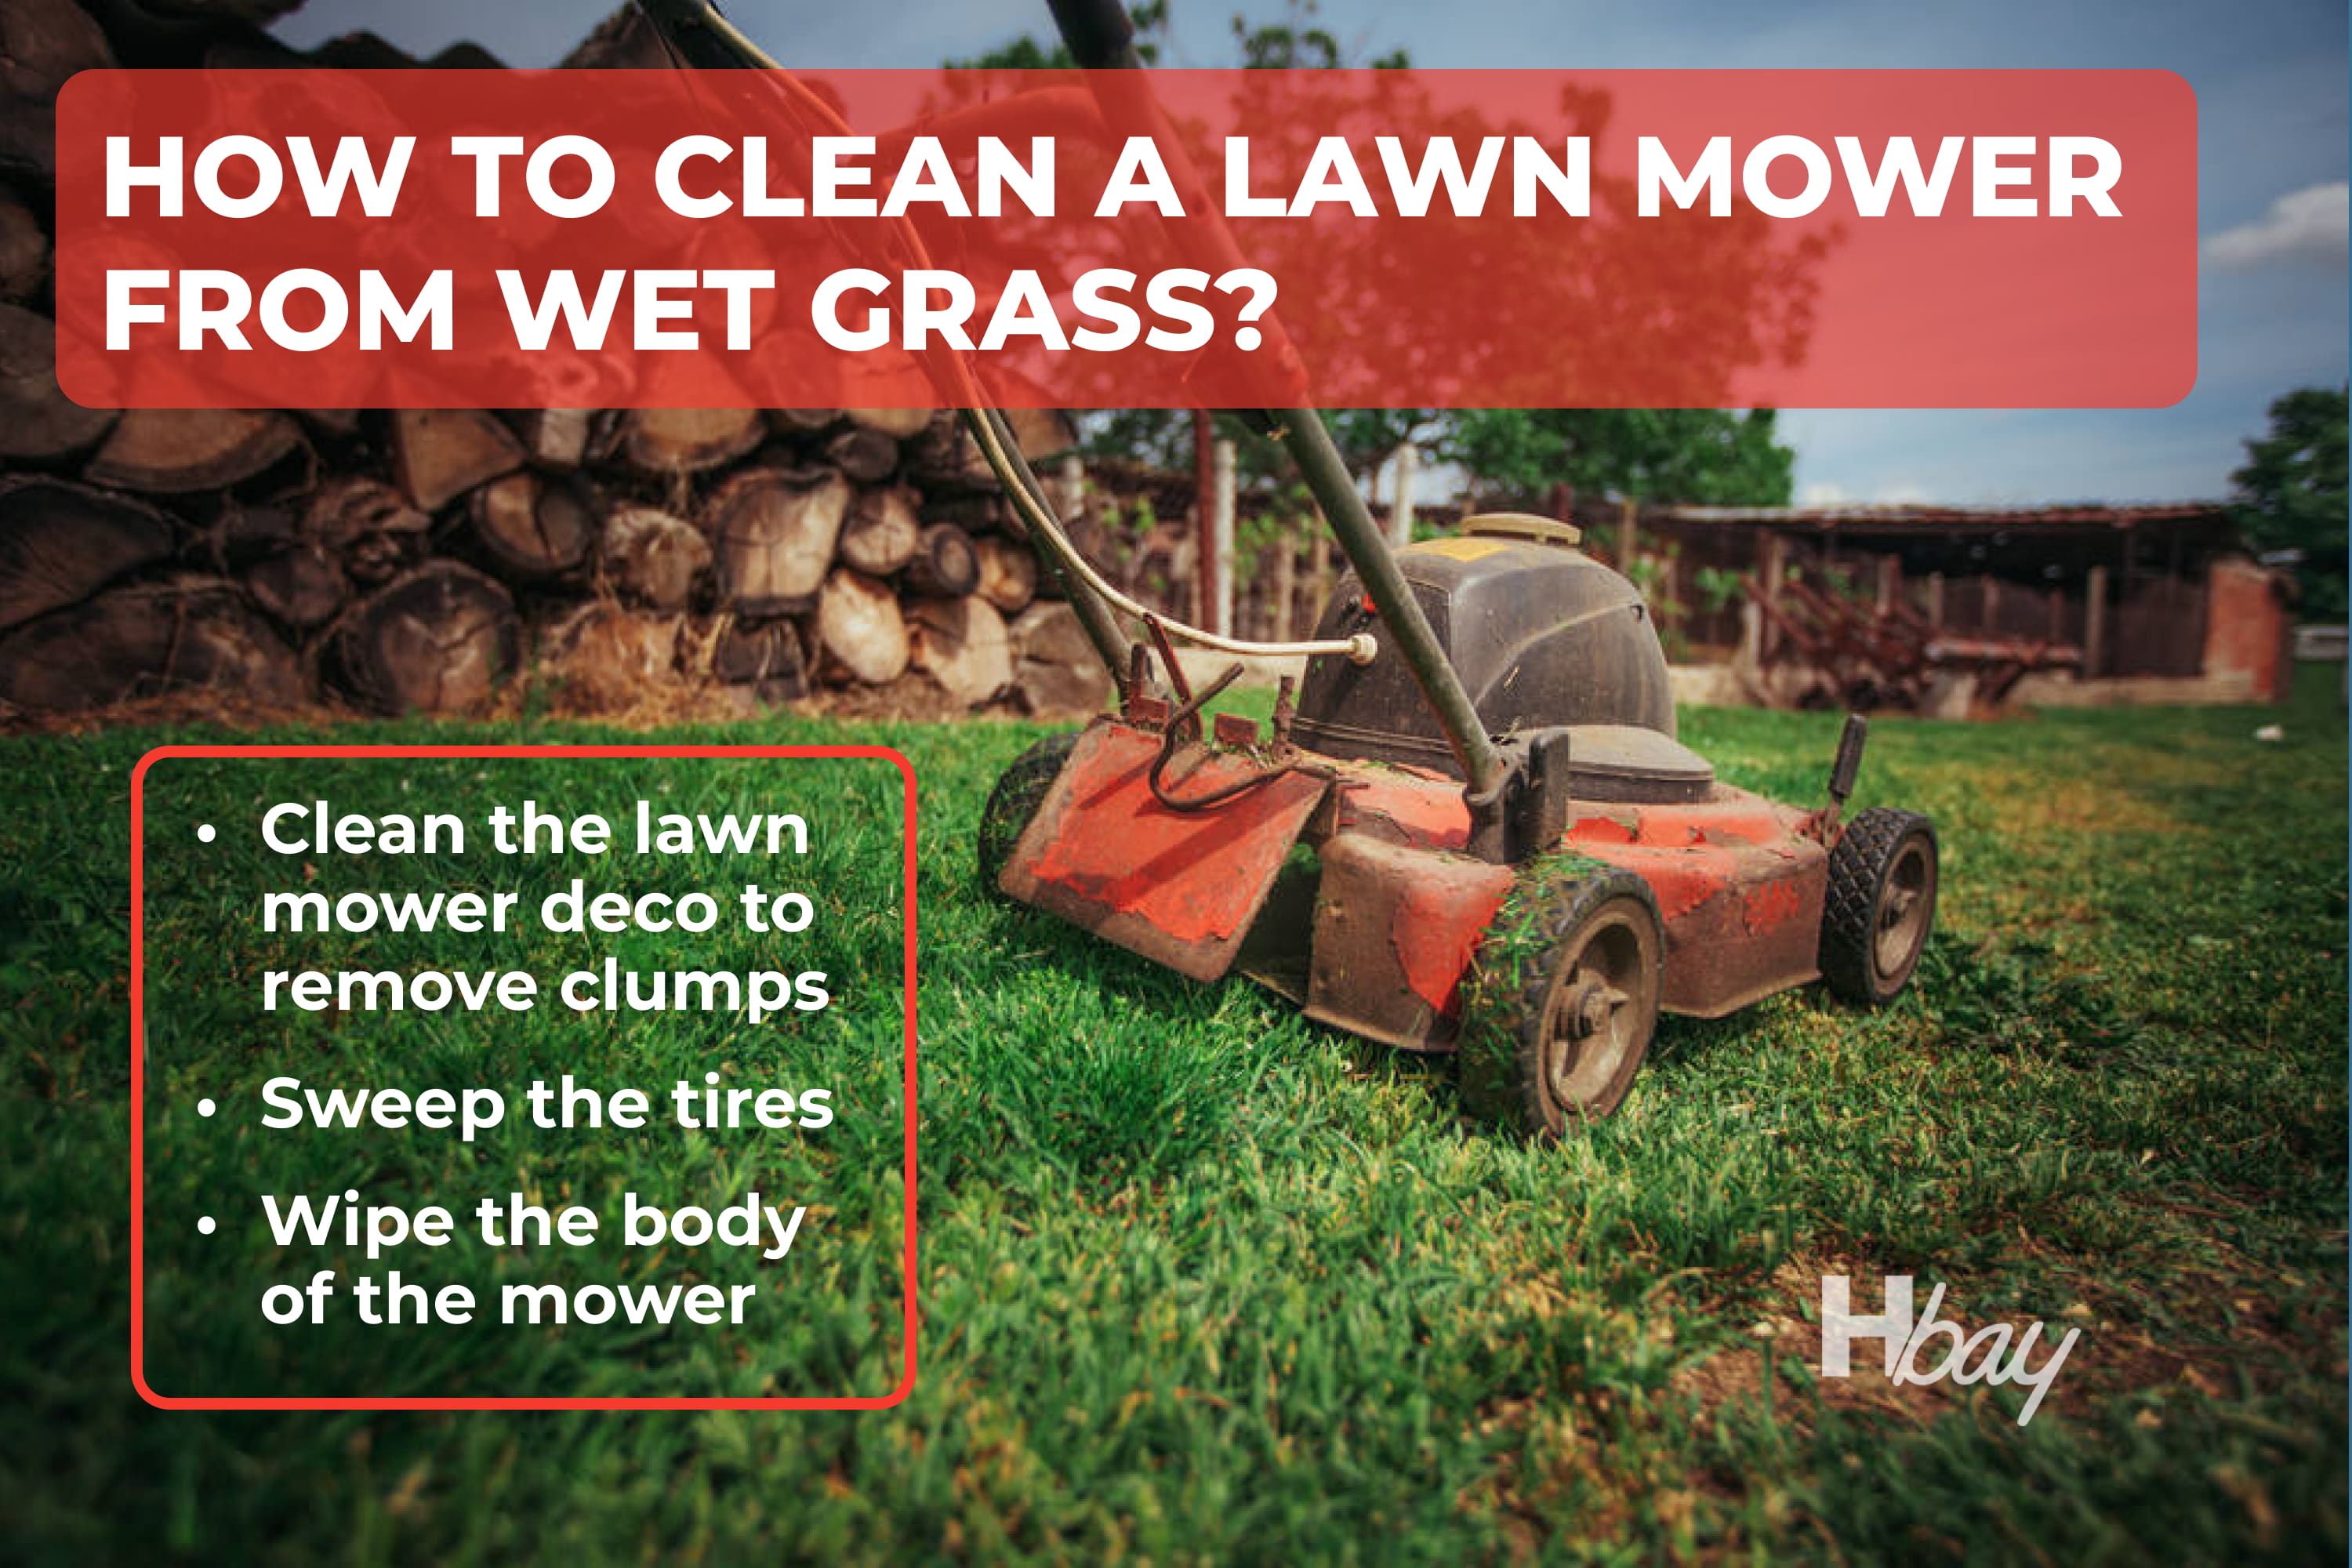 You Will Have to Do Extra Cleanup After Mowing a Wet Lawn